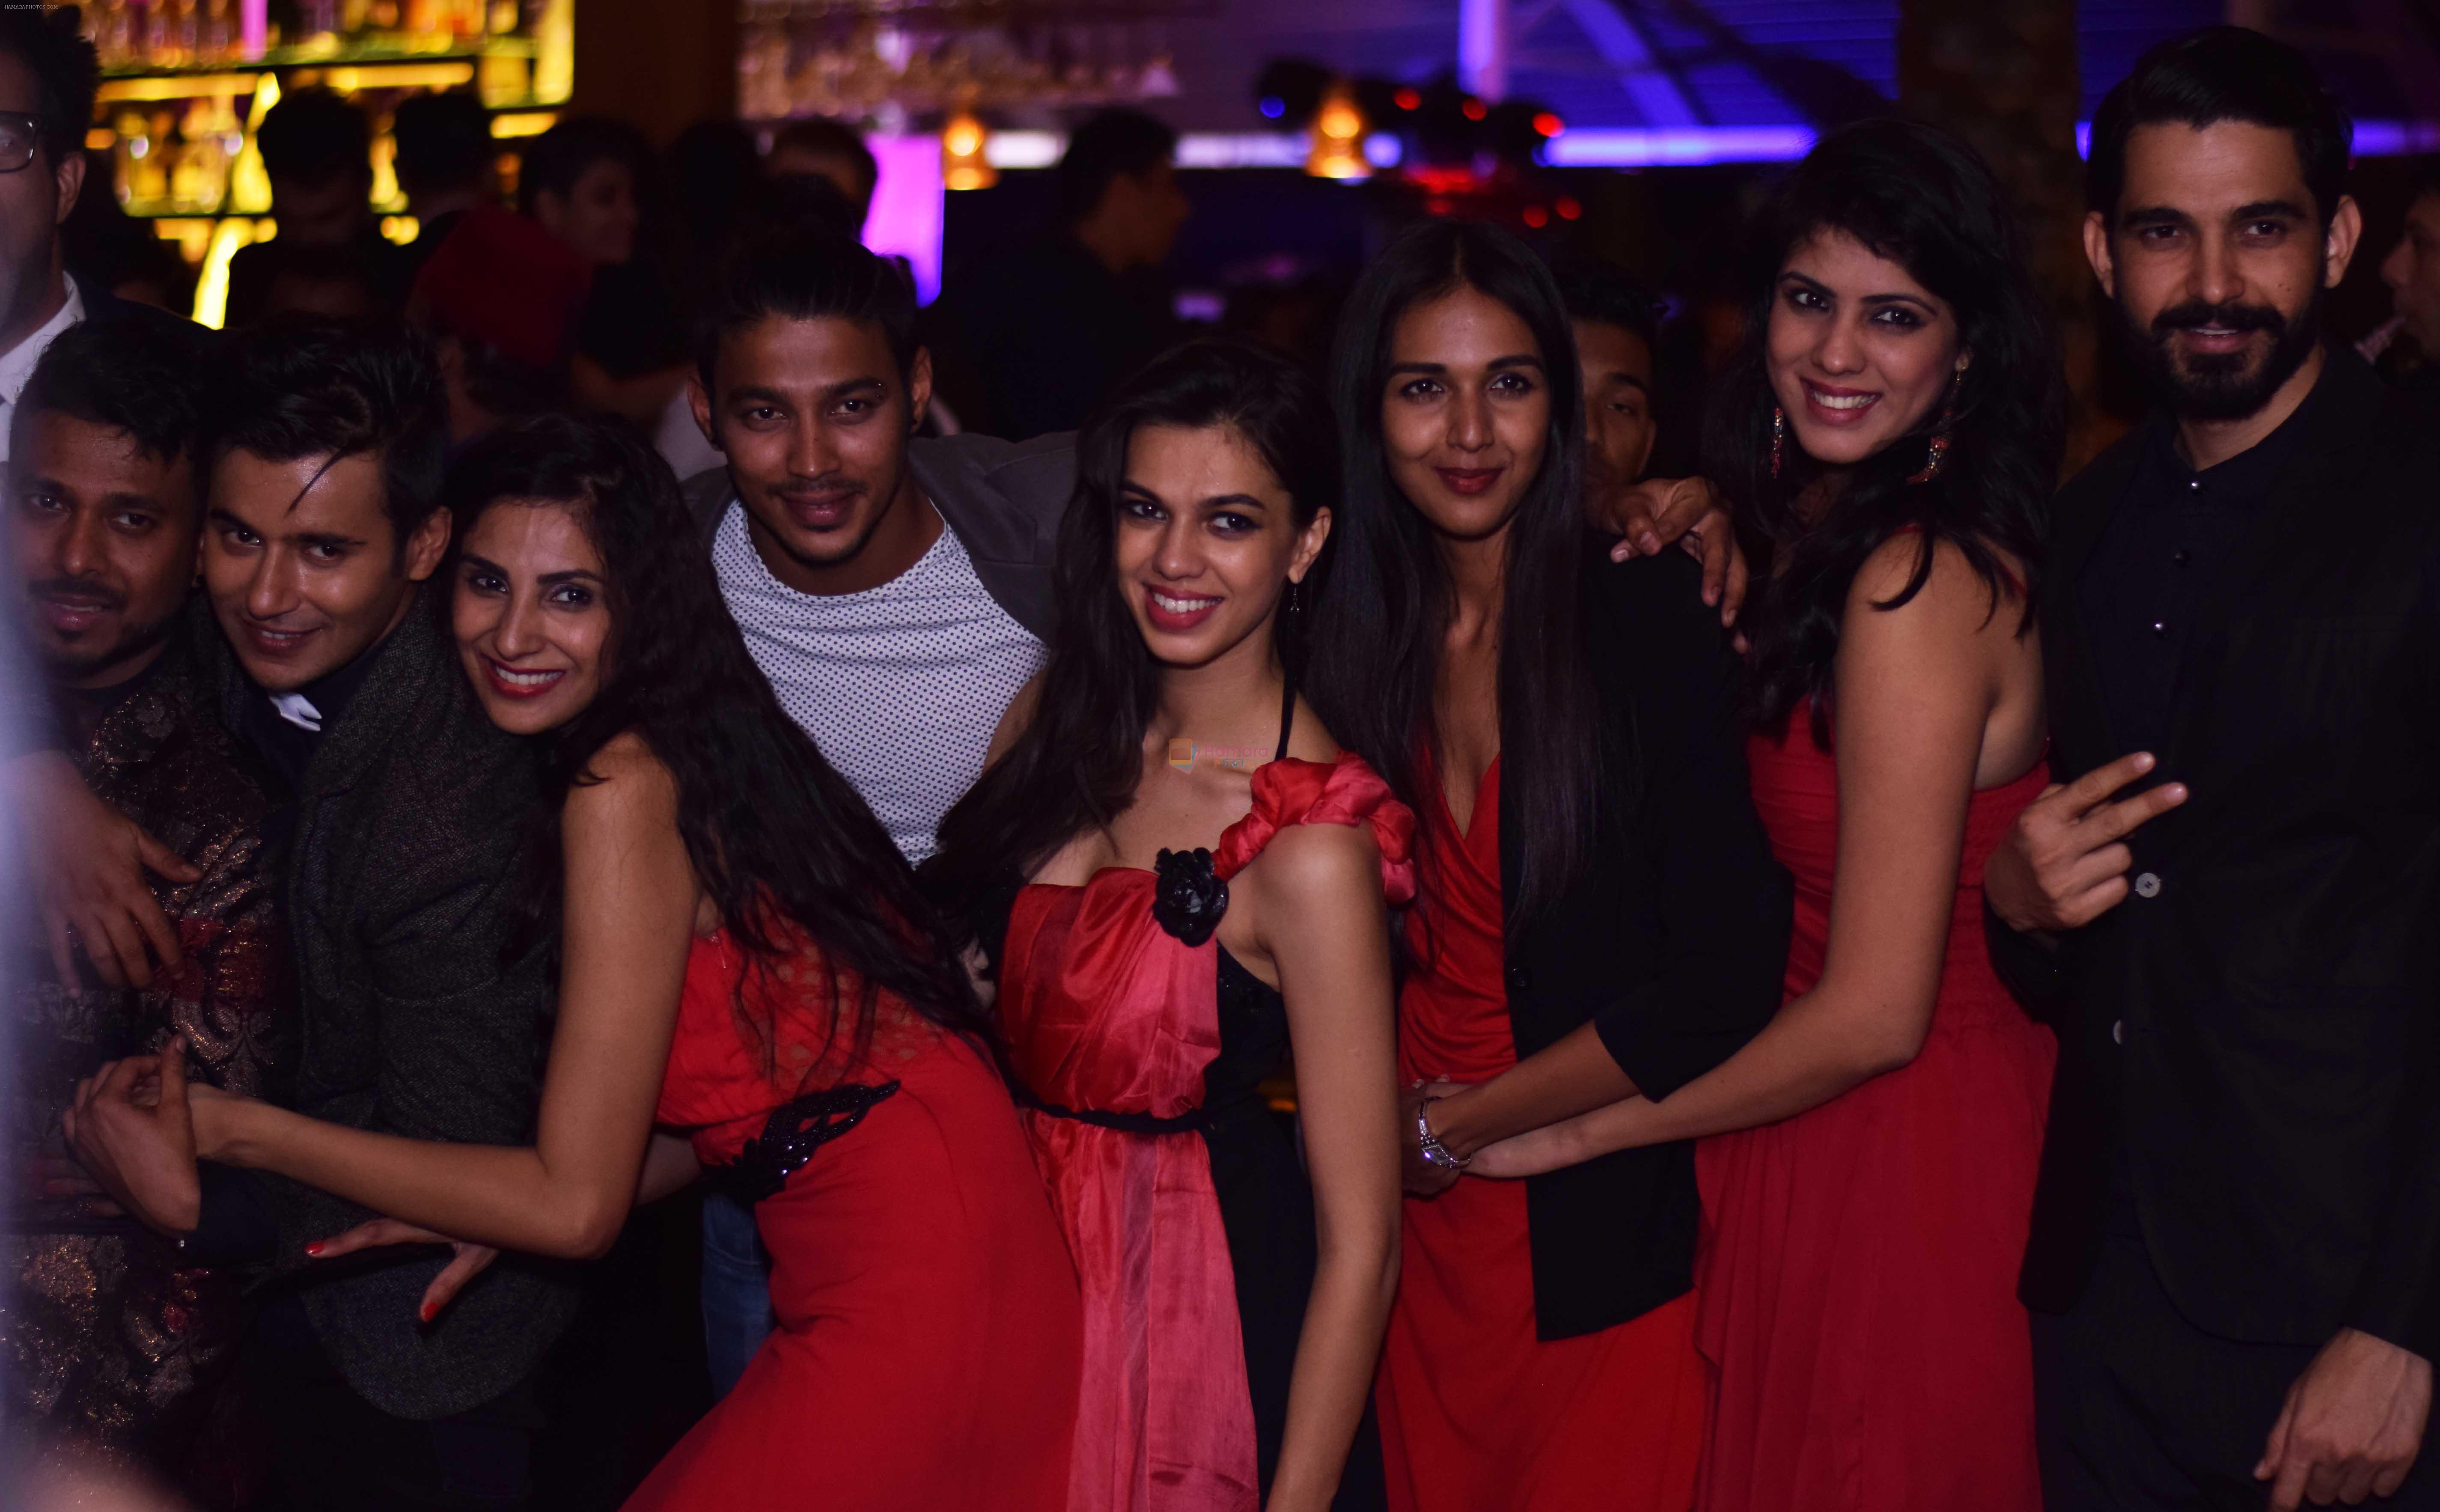 Celebs in a selfie mode at Fashion Director Shakir Shaikh's Theme Based Festive Party at Opa! Bar Cafe.